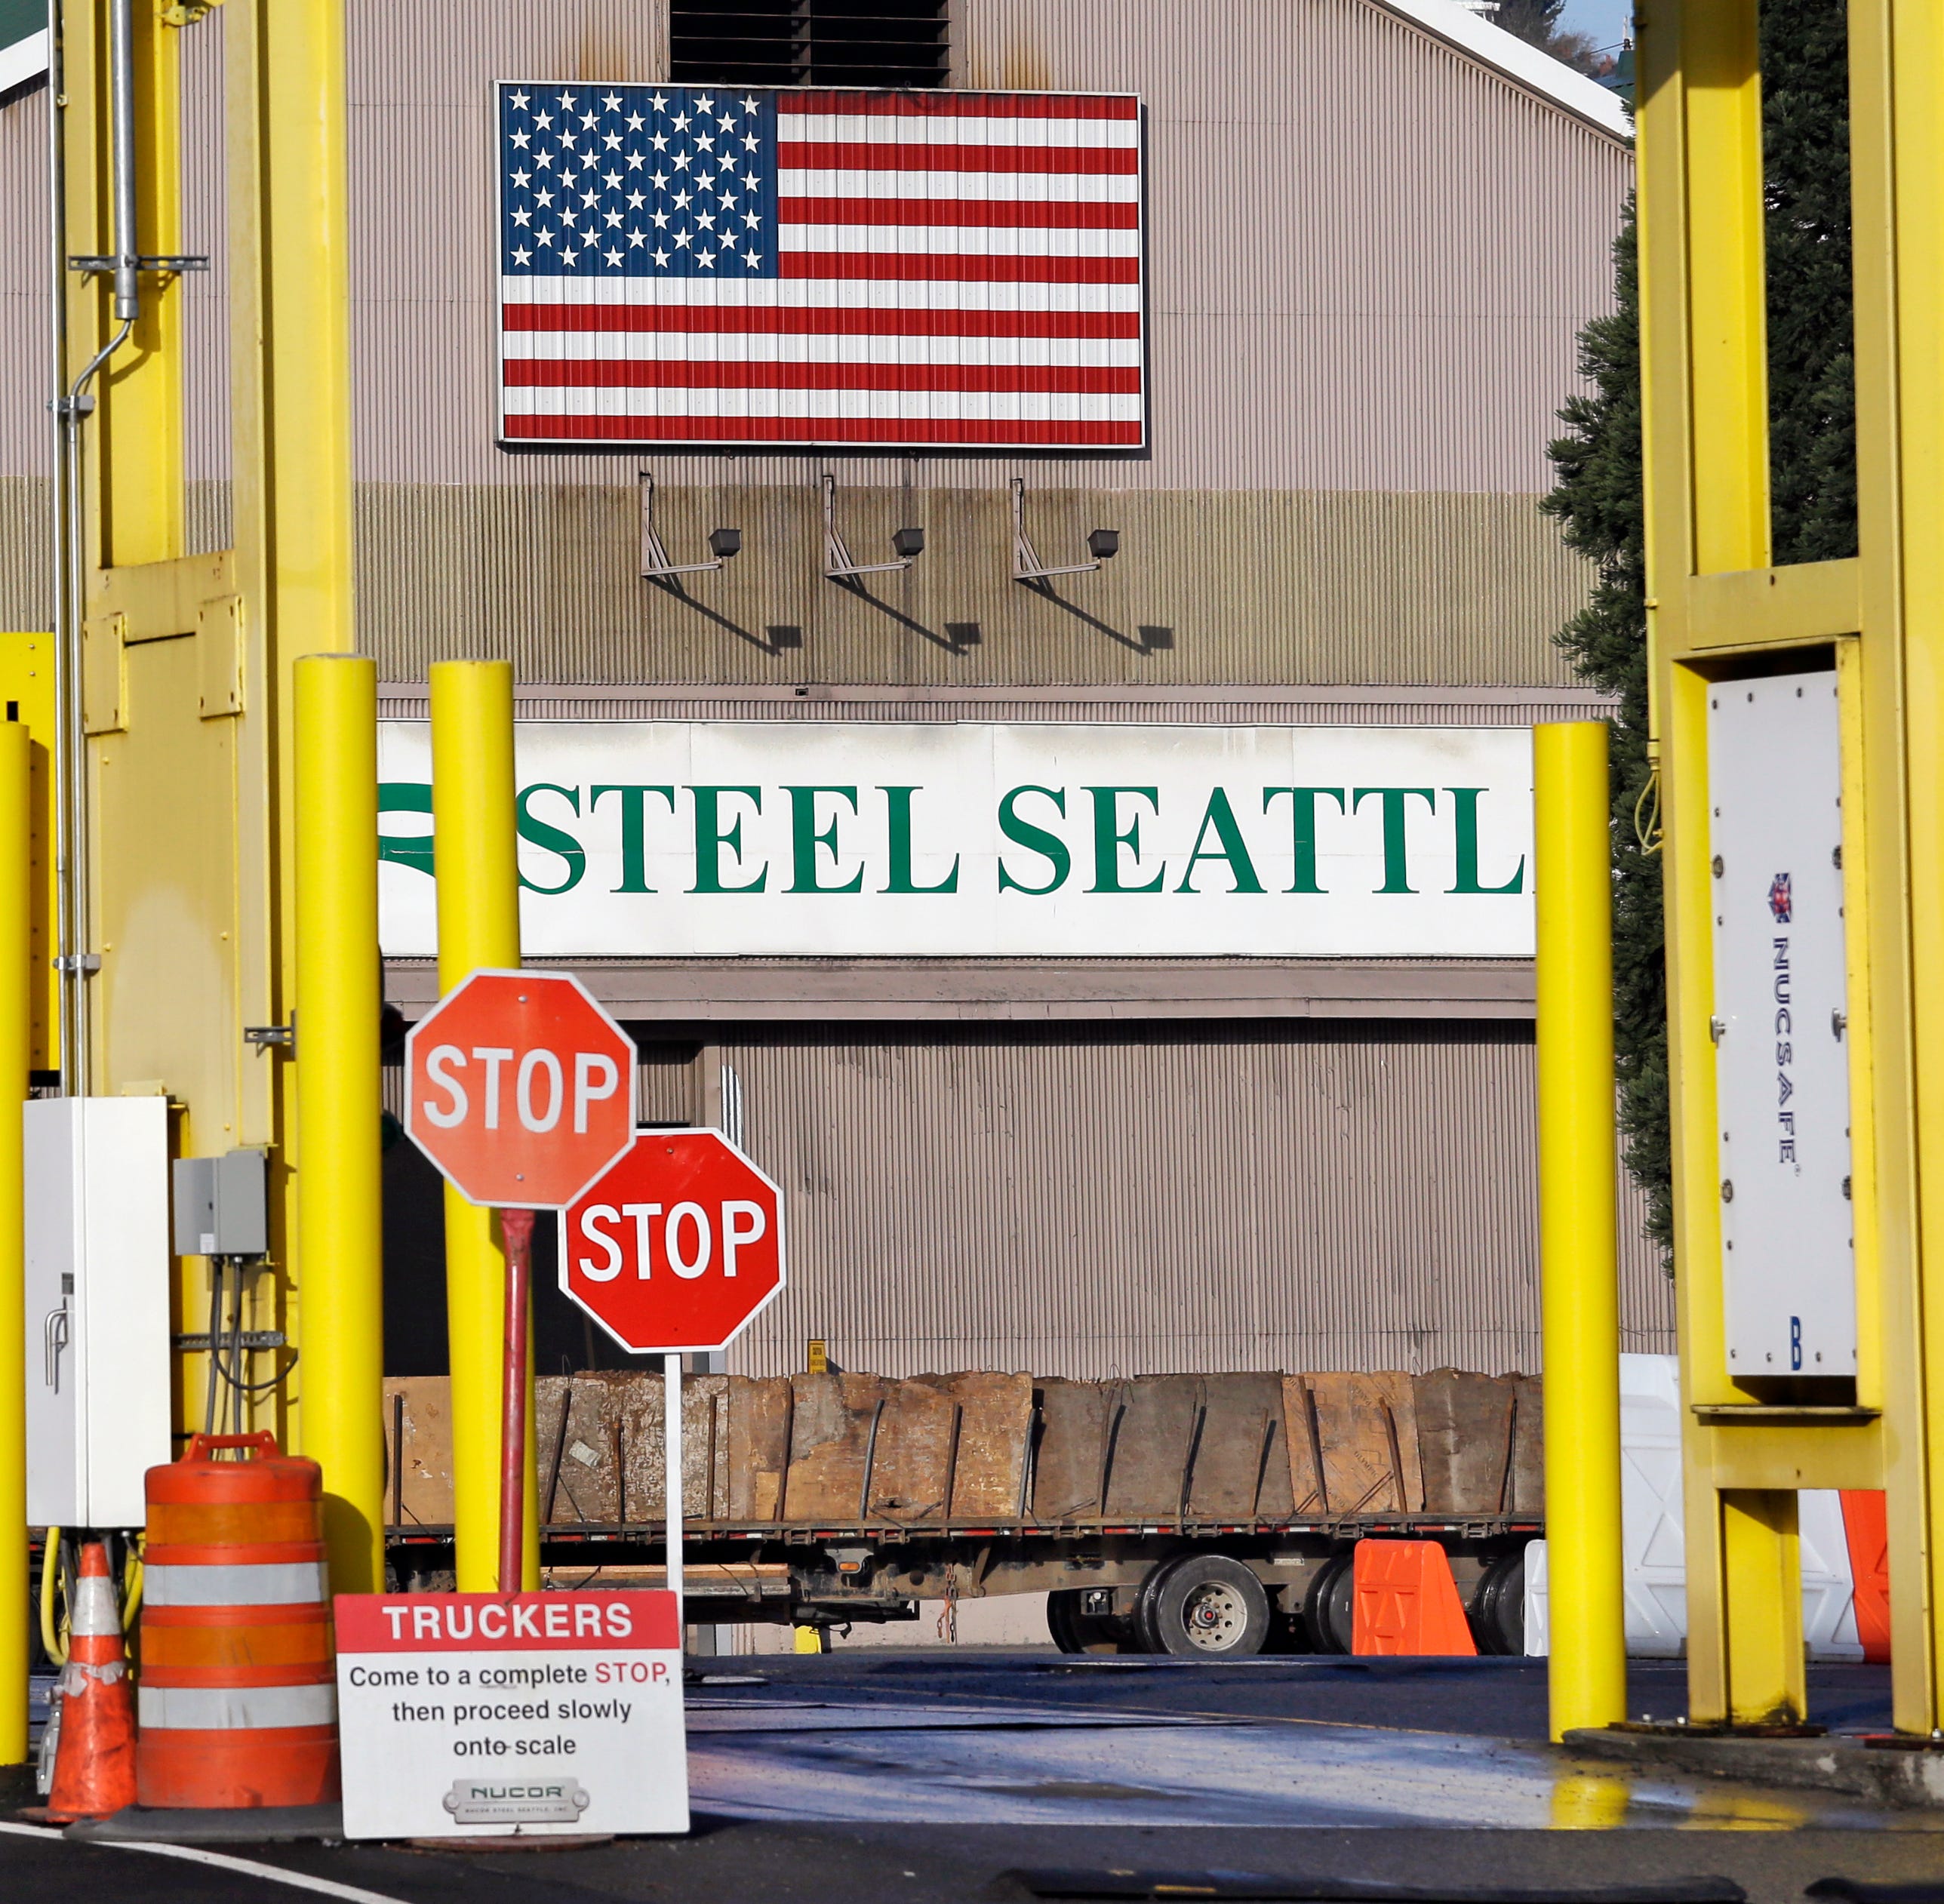 In this Feb. 25, 2016 file photo, a truck carries a load at the Nucor Steel plant in Seattle. U.S. companies pursuing exemptions from President Donald Trump's tariff on imported steel are accusing American steel manufacturers of spreading inaccurate 